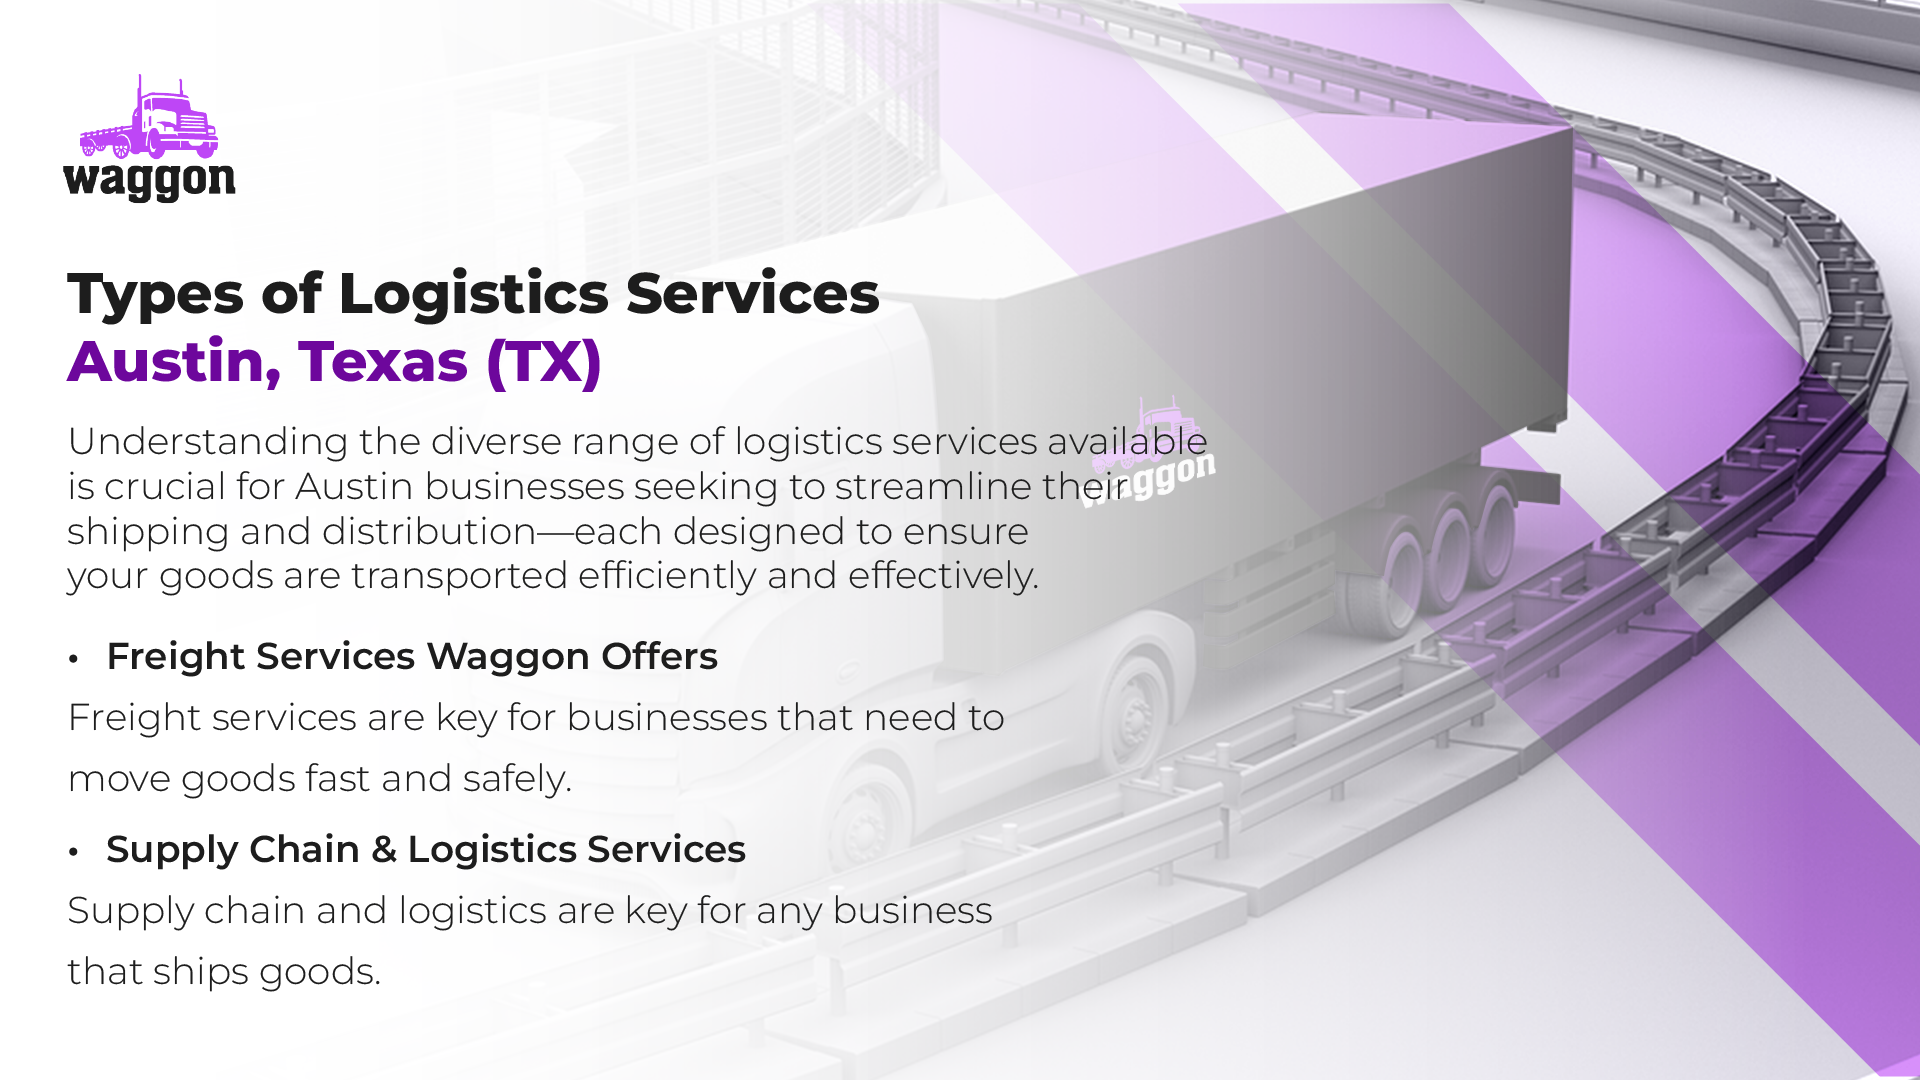 Types of Logistics Services in Austin, Texas (TX)